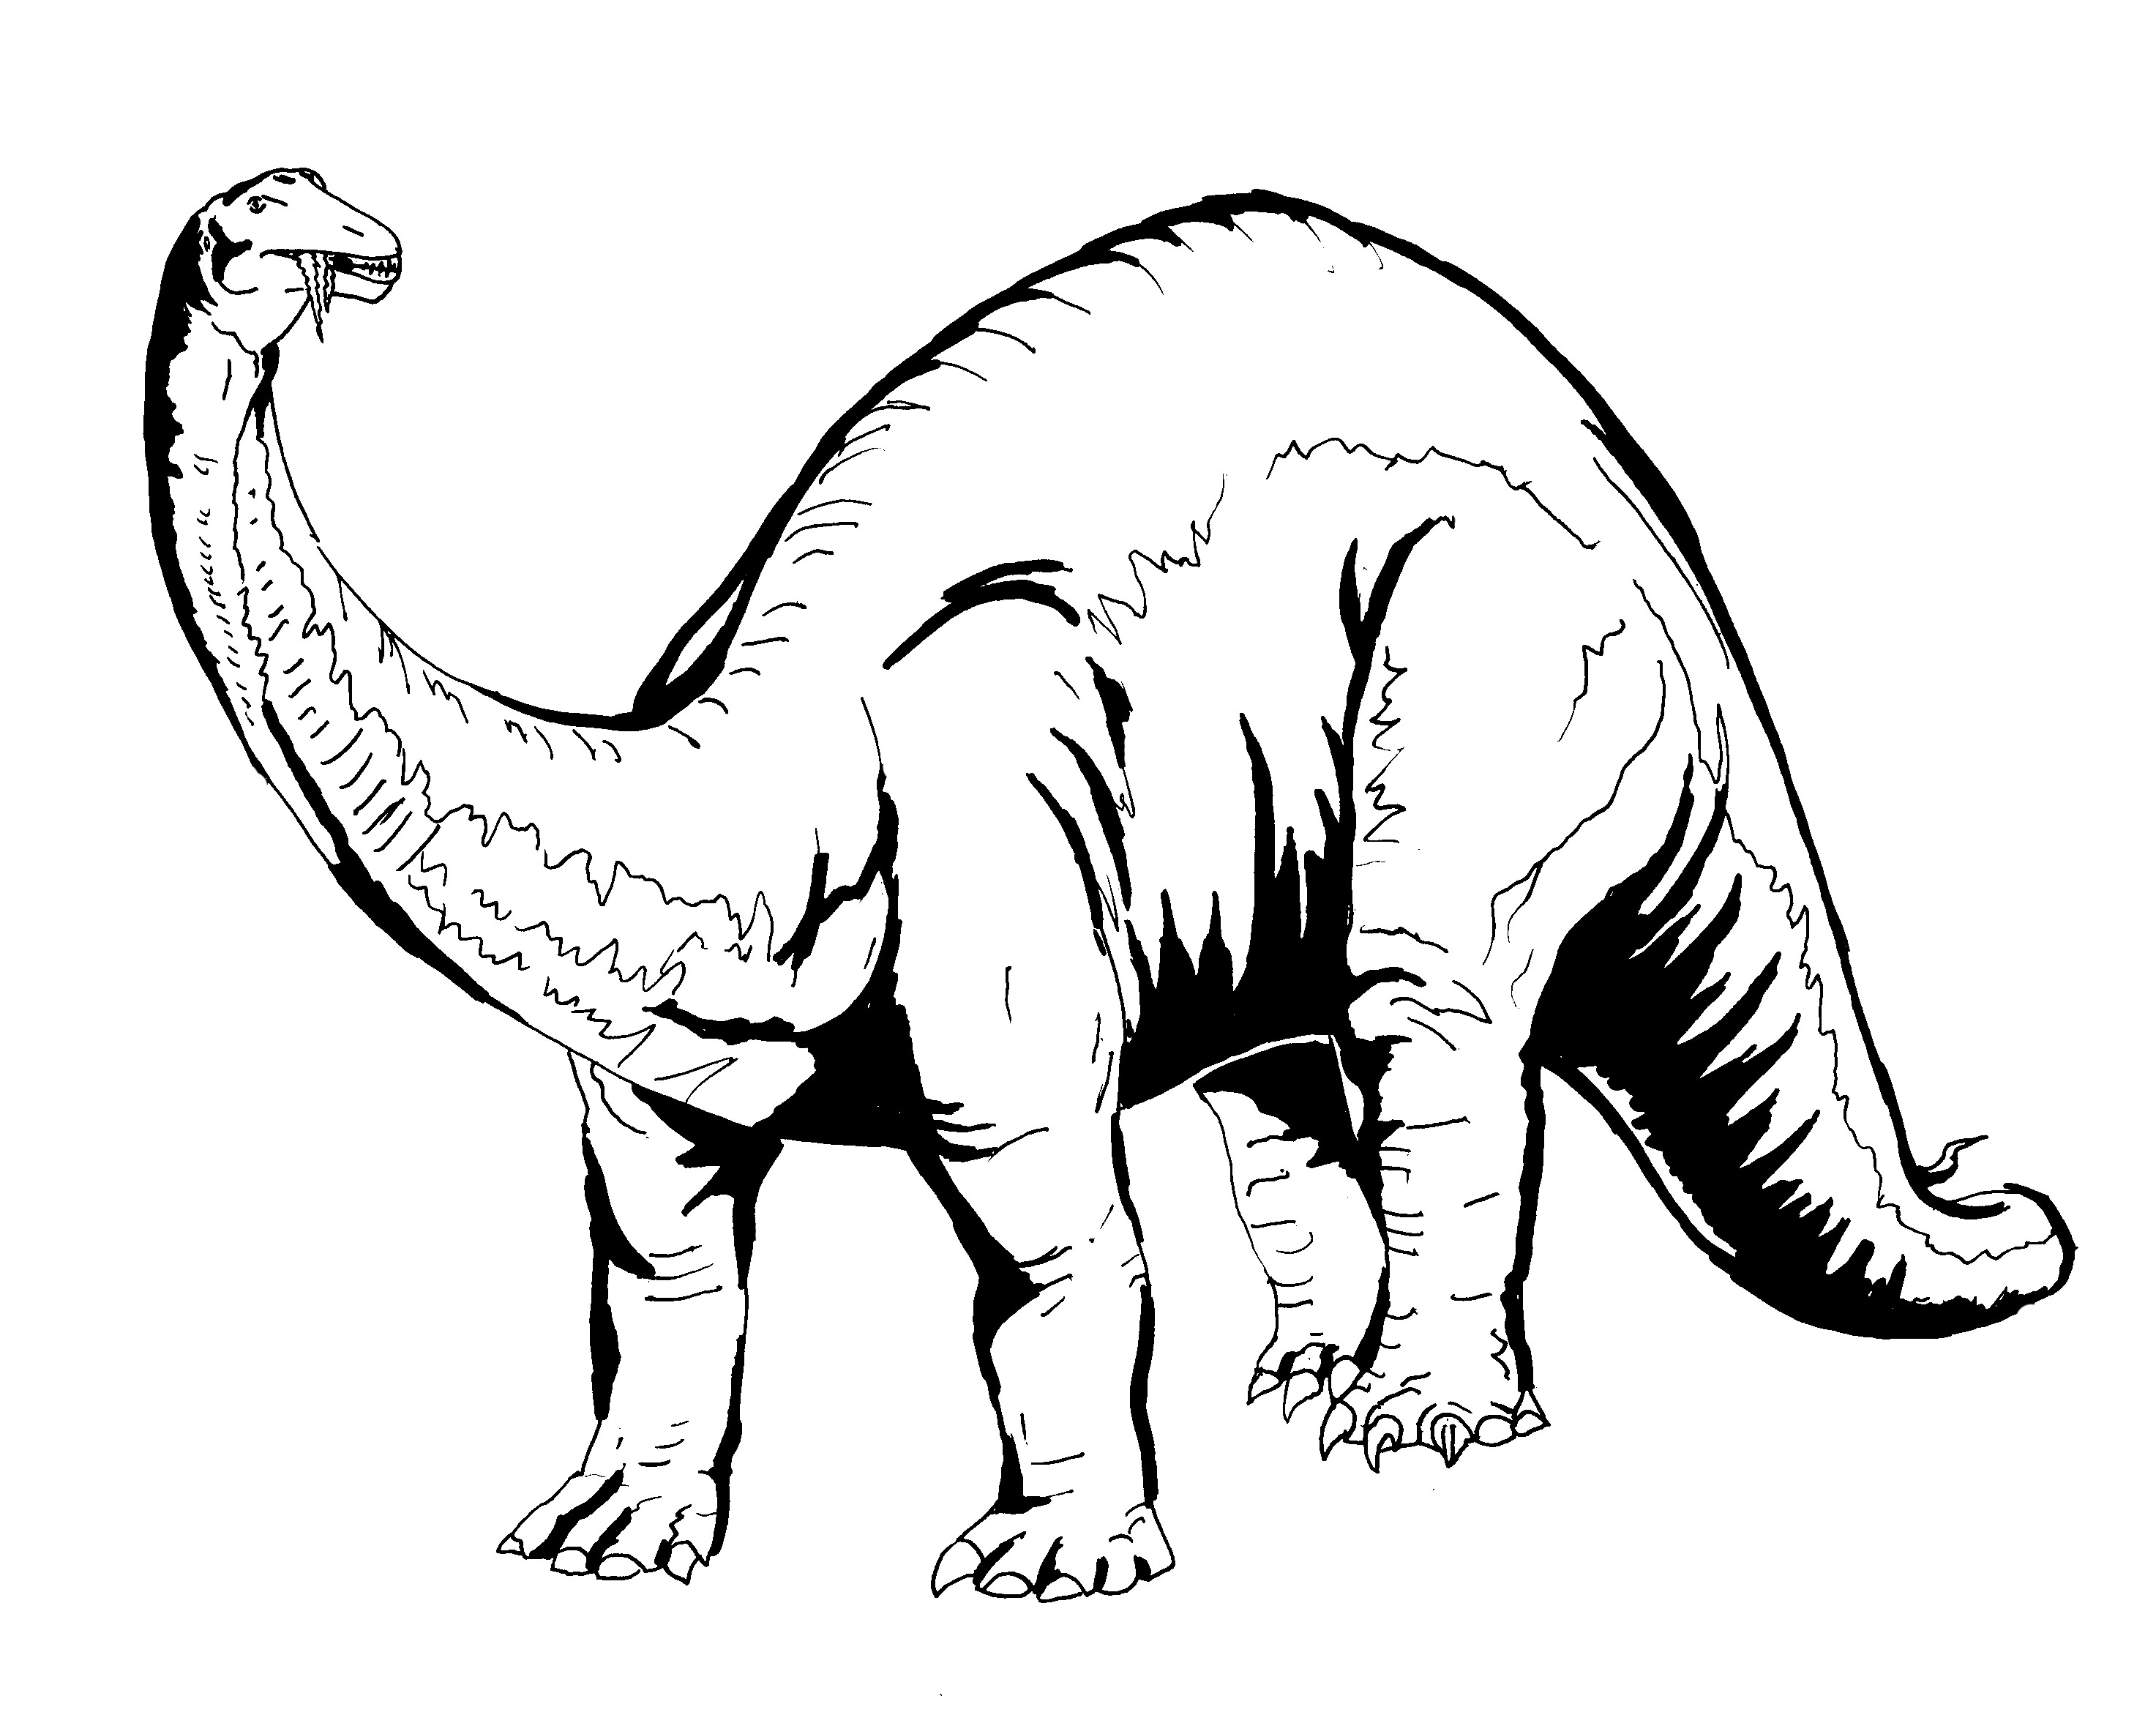 Dinosaur Coloring Pages 2014- Dr. Odd